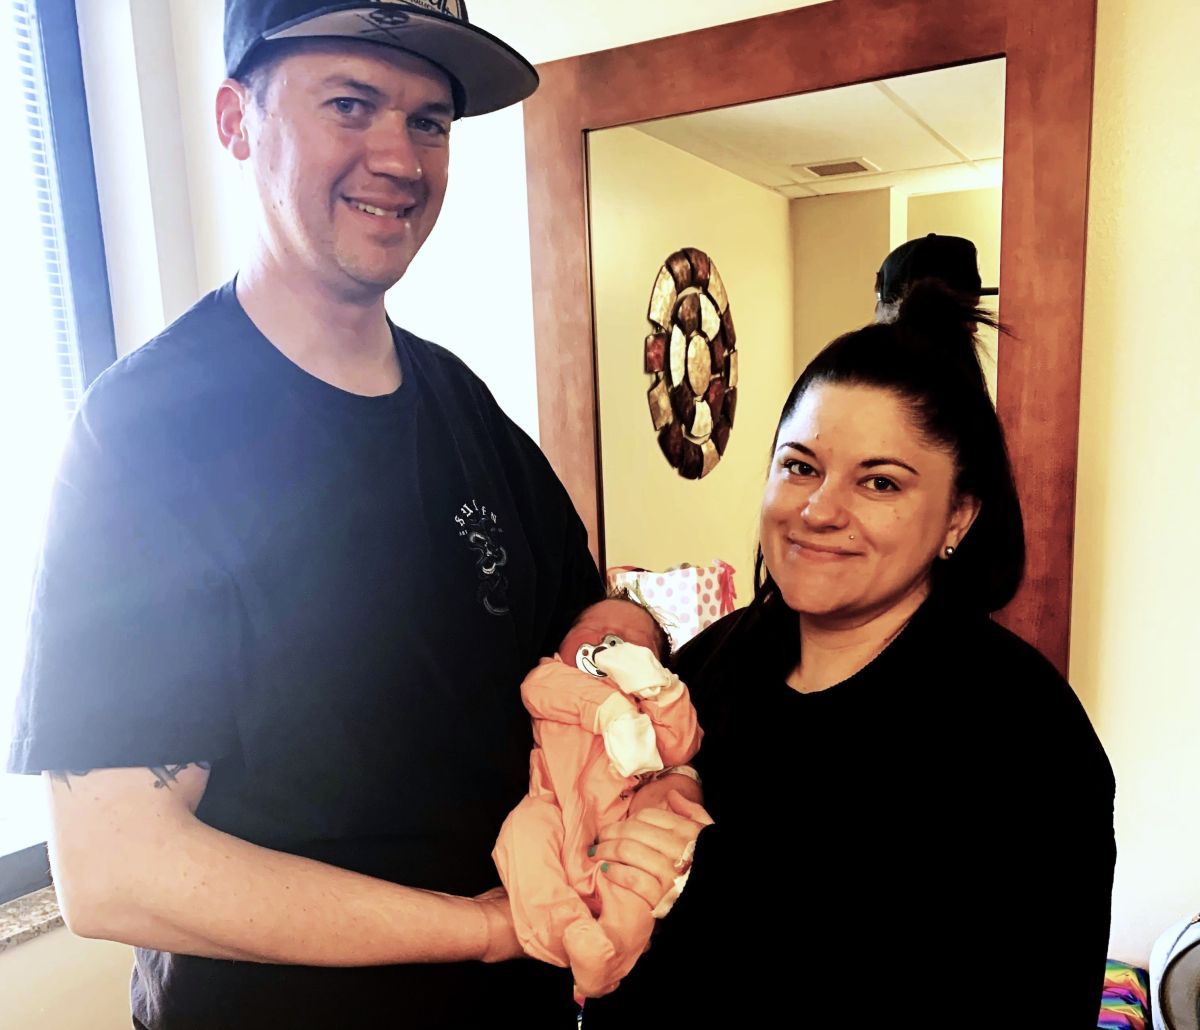 Alyssa and Justin hold their newborn baby Lily